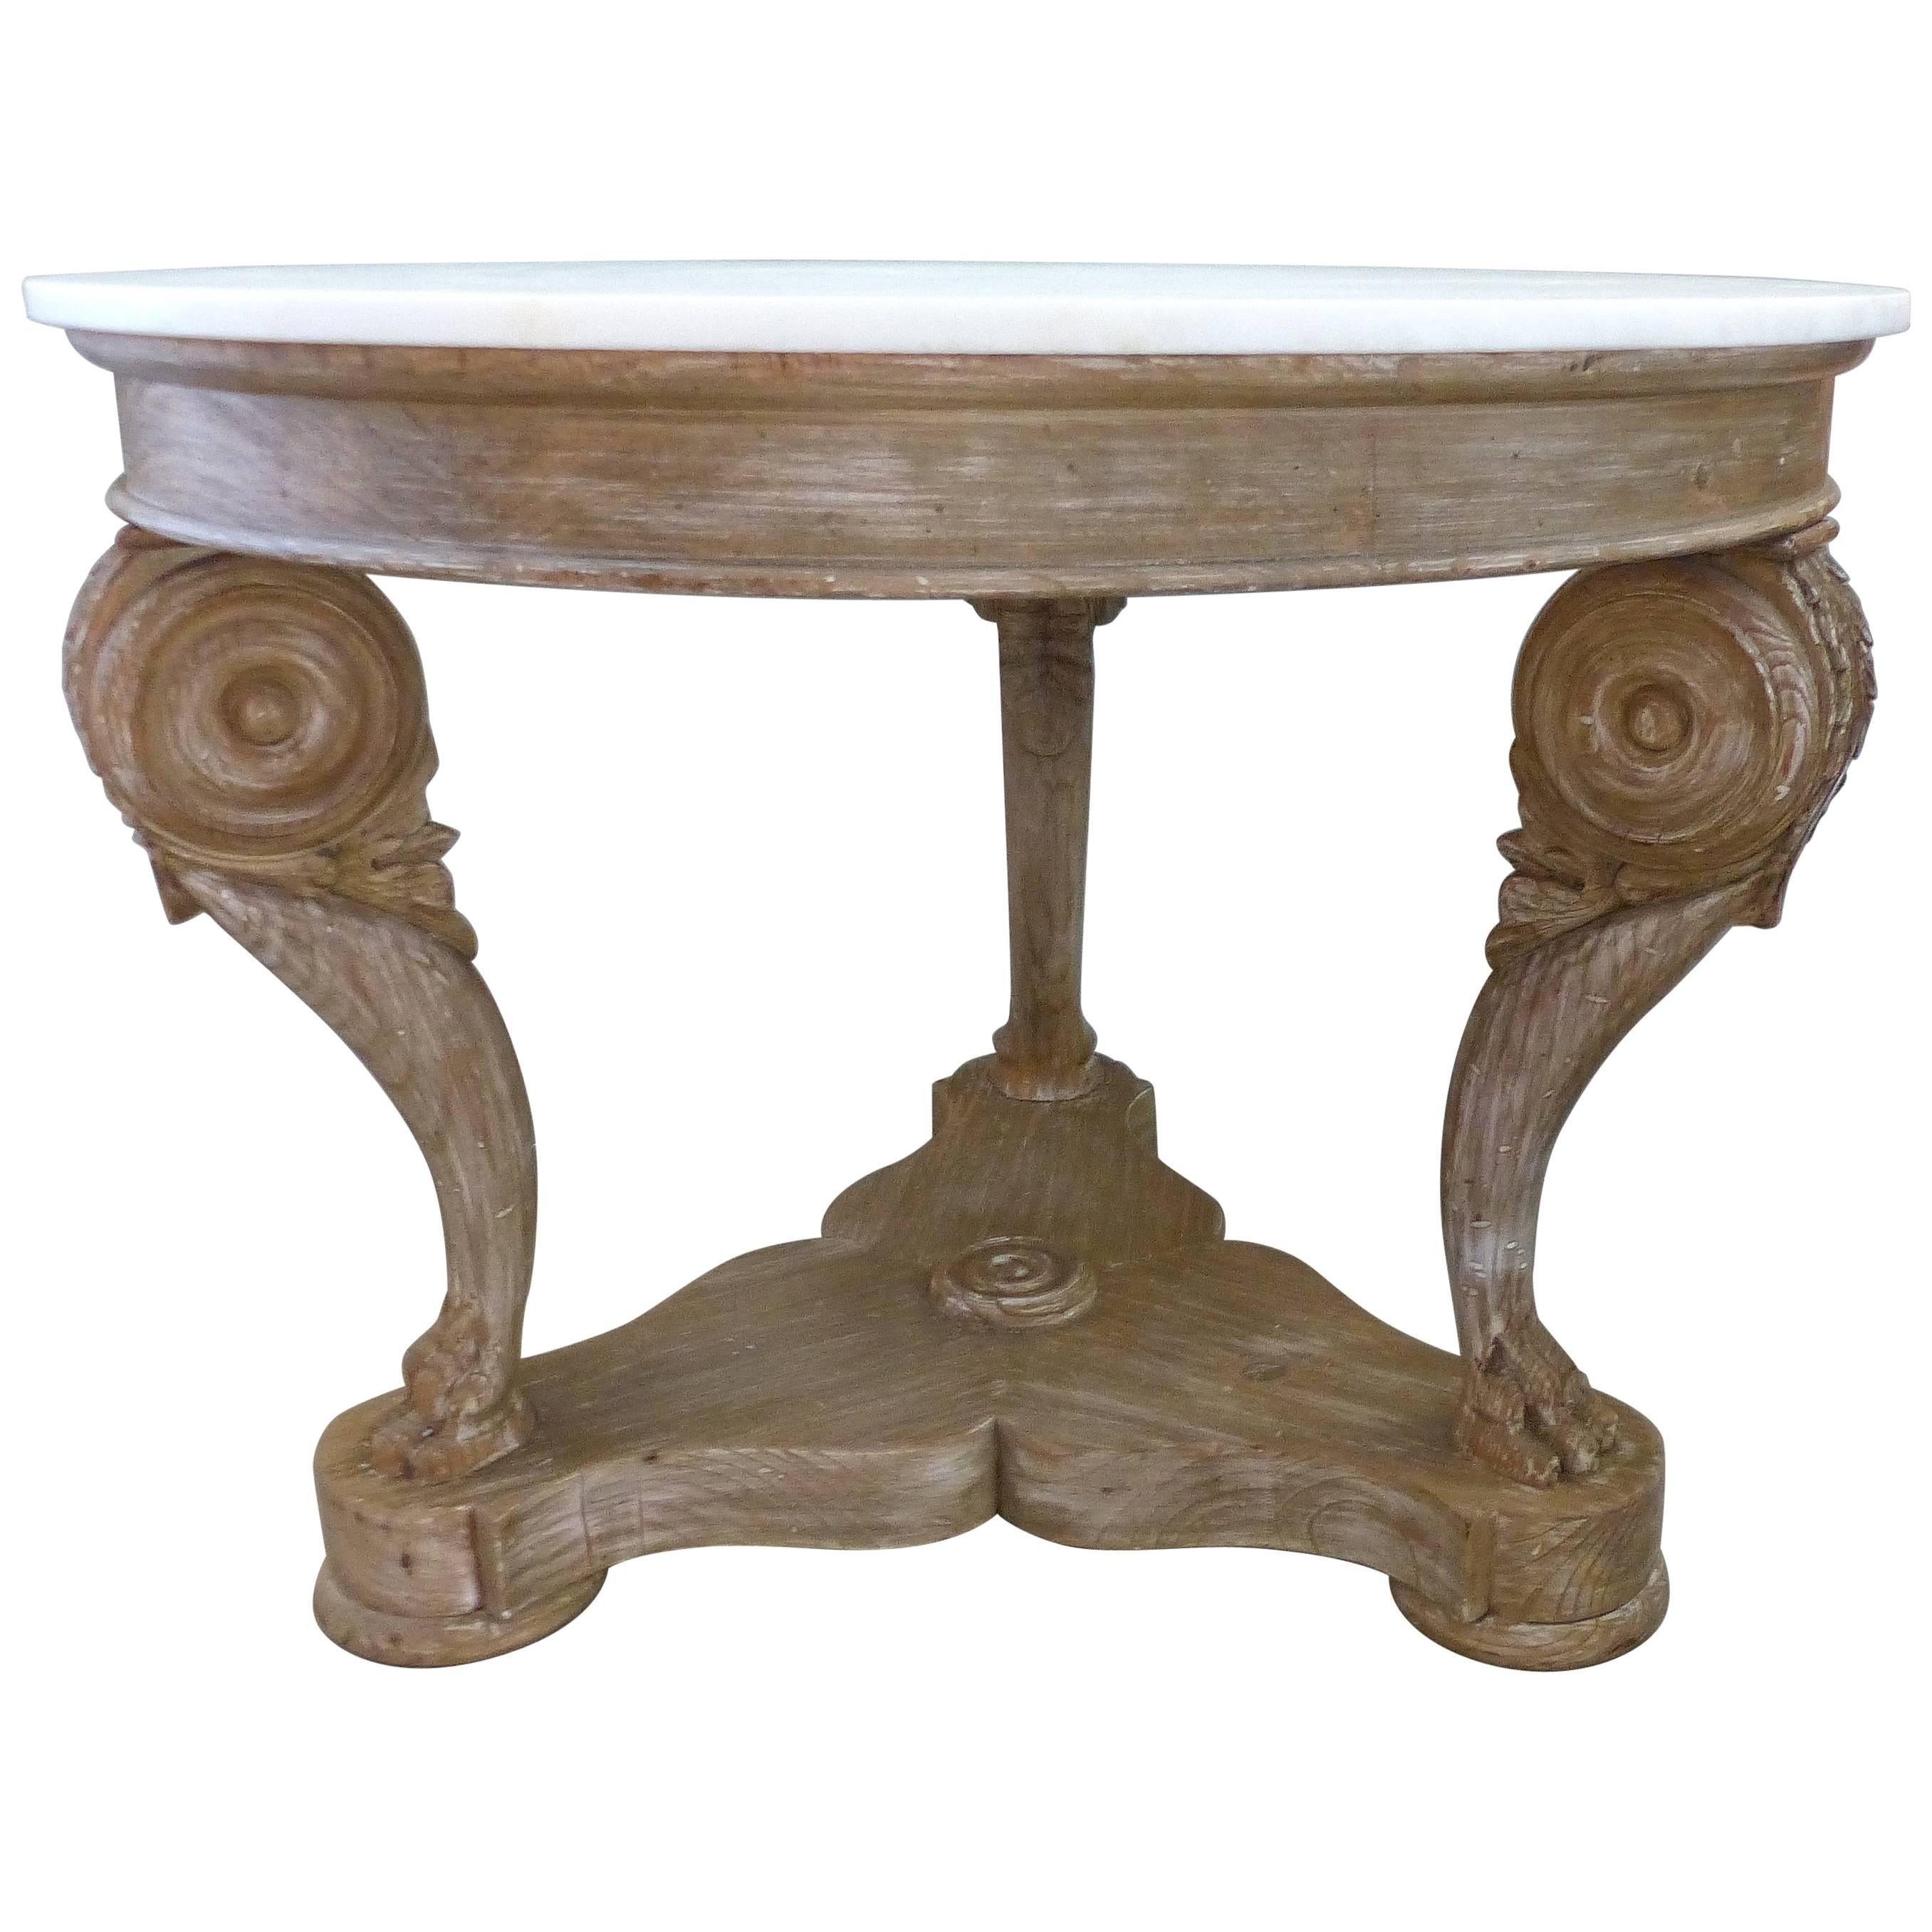 William Switzer 'Vancouver, B.C. Hand-Crafted Marbletop Center Table